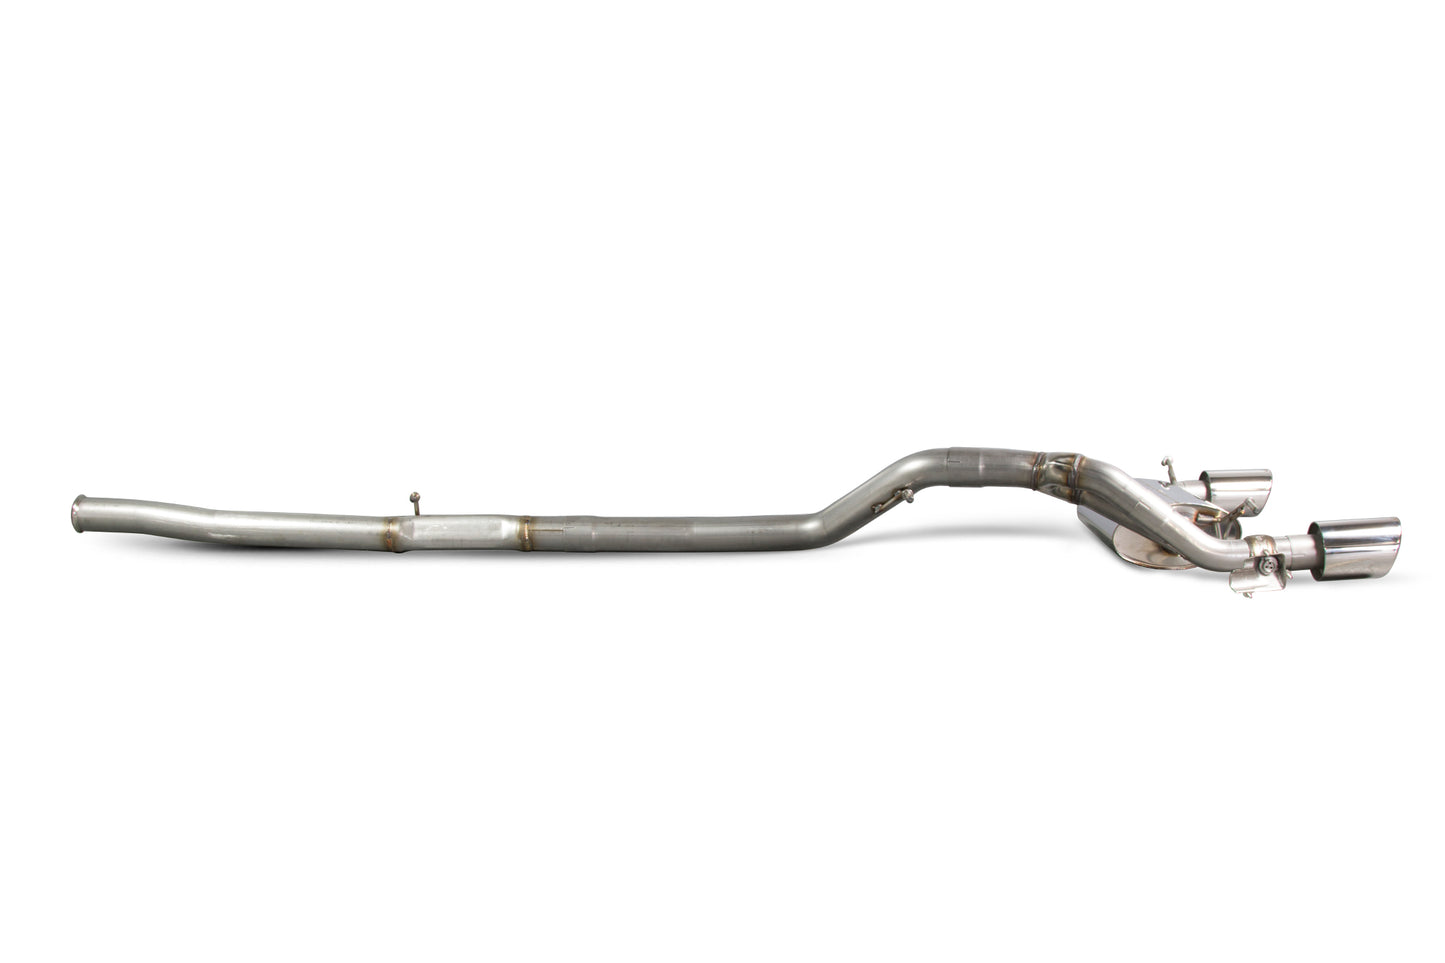 Scorpion Cat Back Exhaust w/Valve (Indy Tips) - Ford Focus Mk3 RS (16-18)